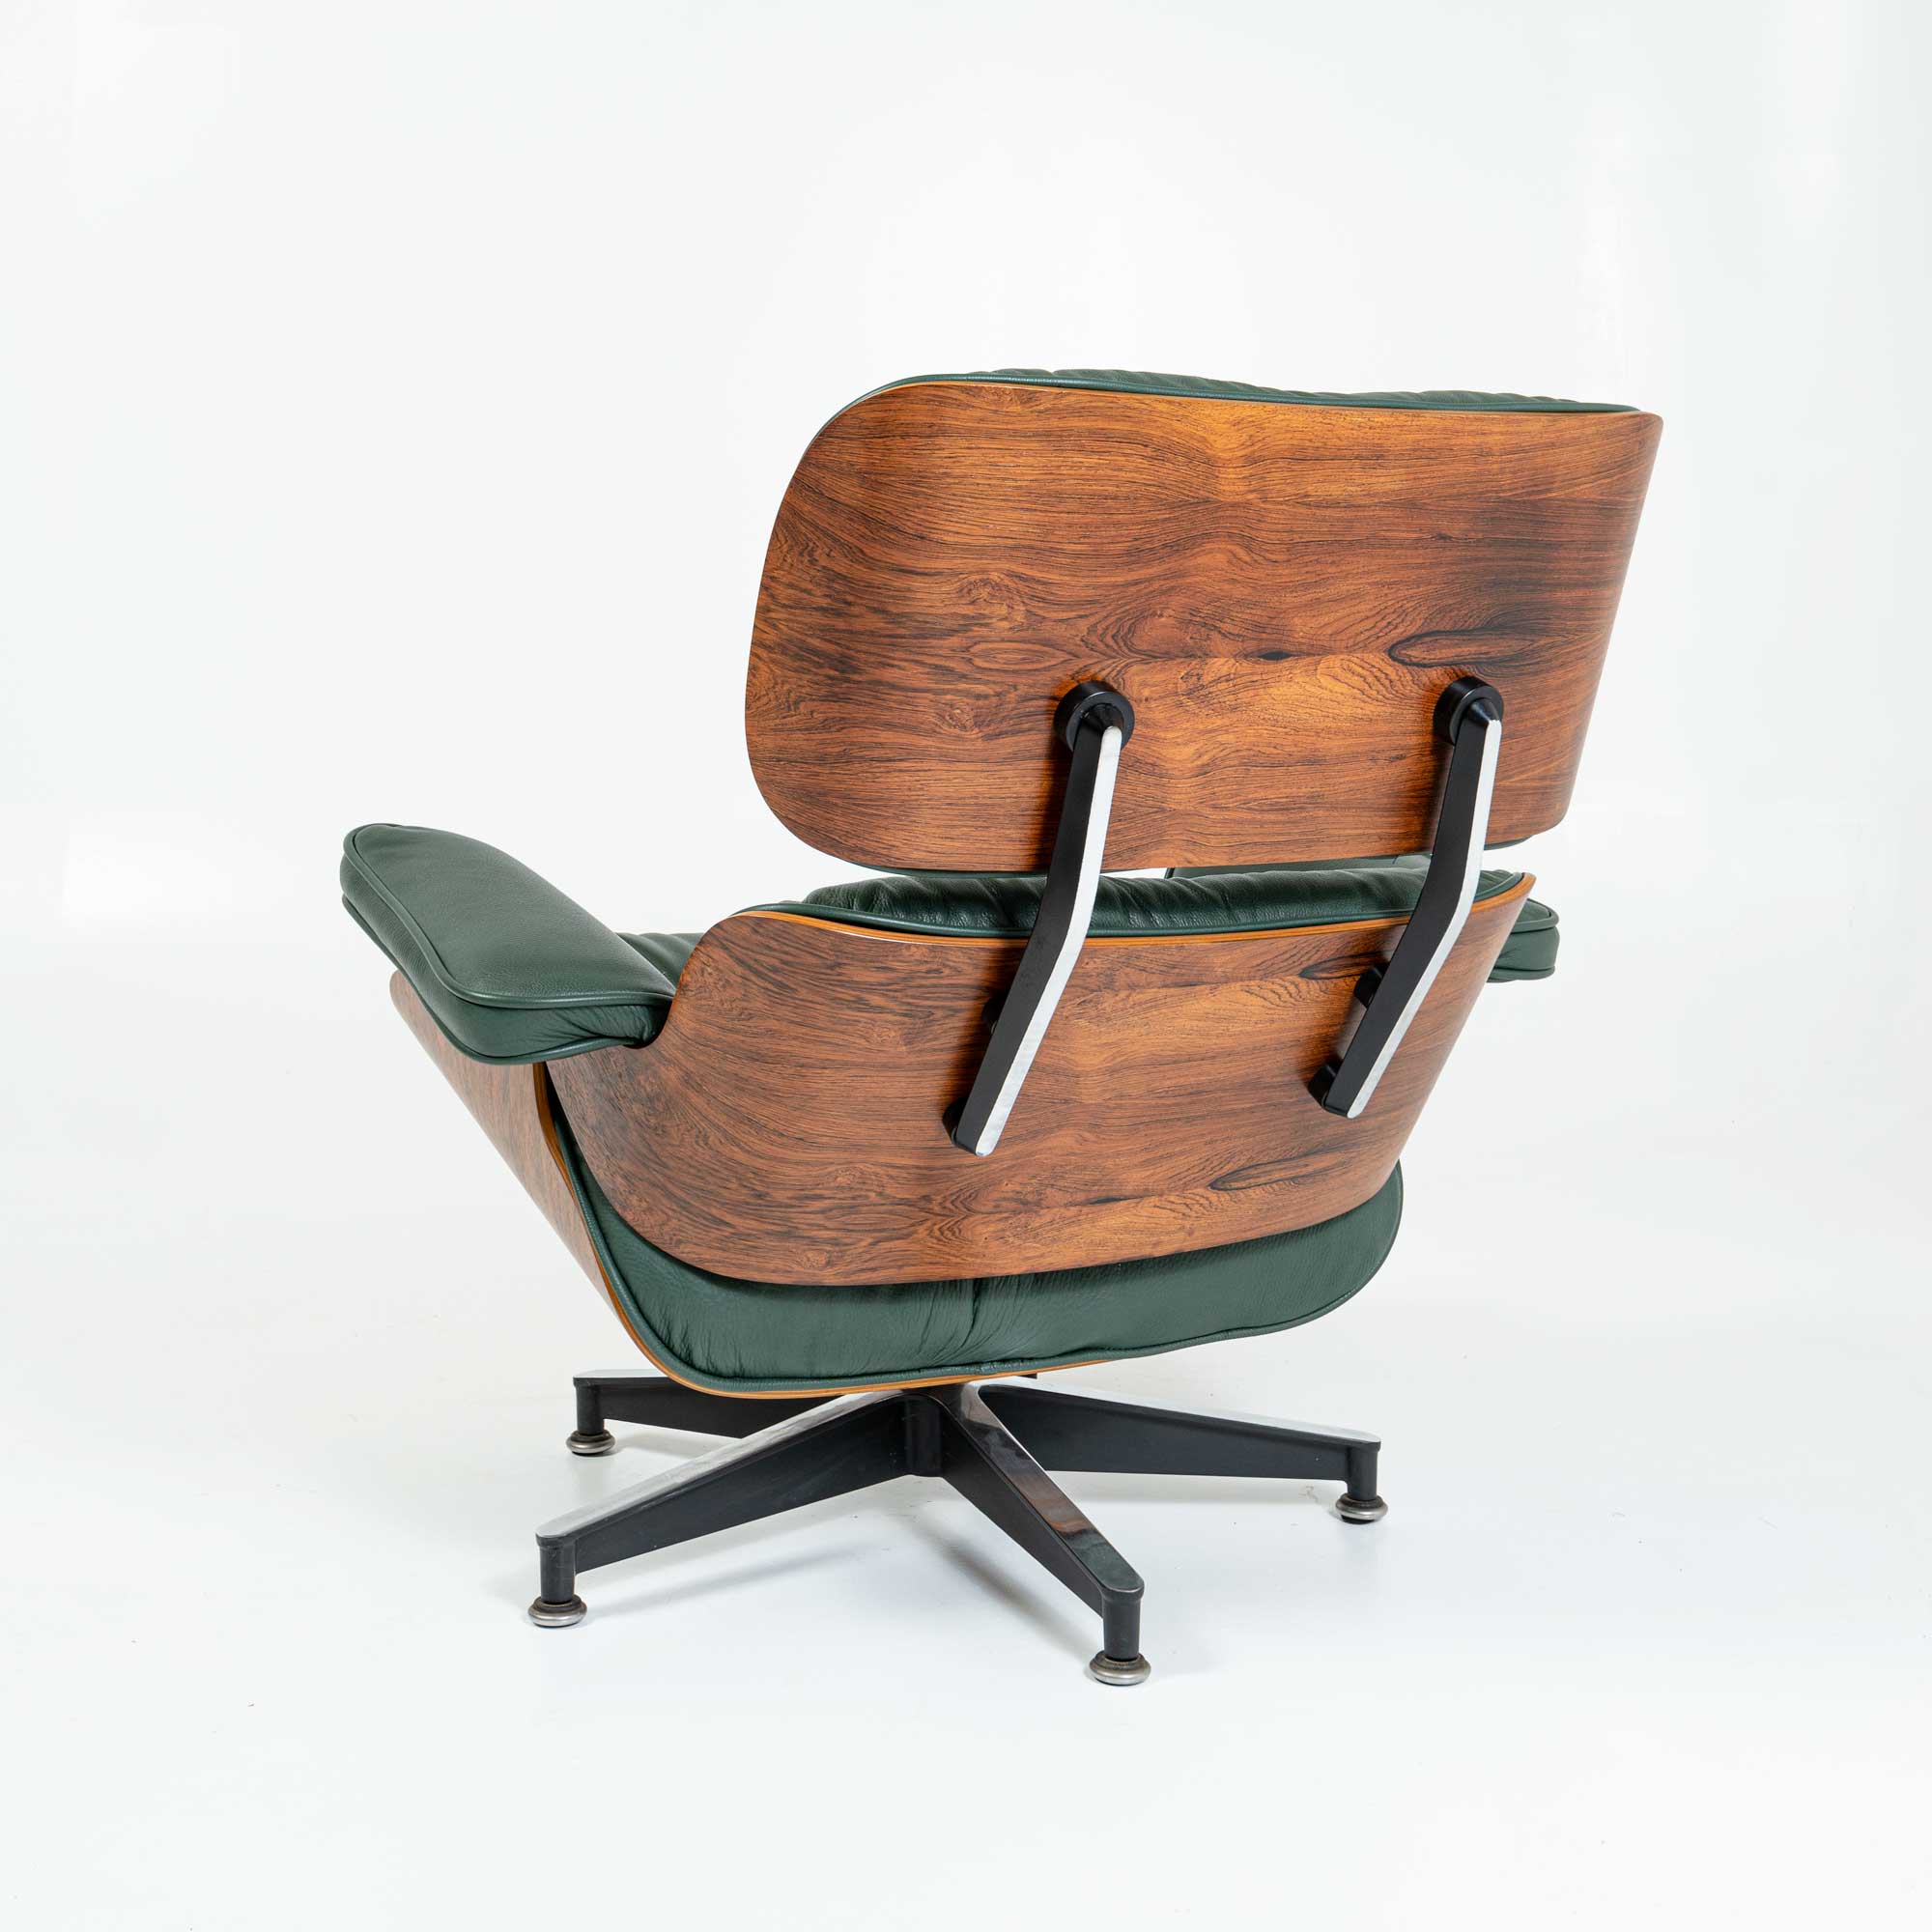 Custom Order: Eames Lounge Chair & Ottoman (670 & 671) in your choice of leather.